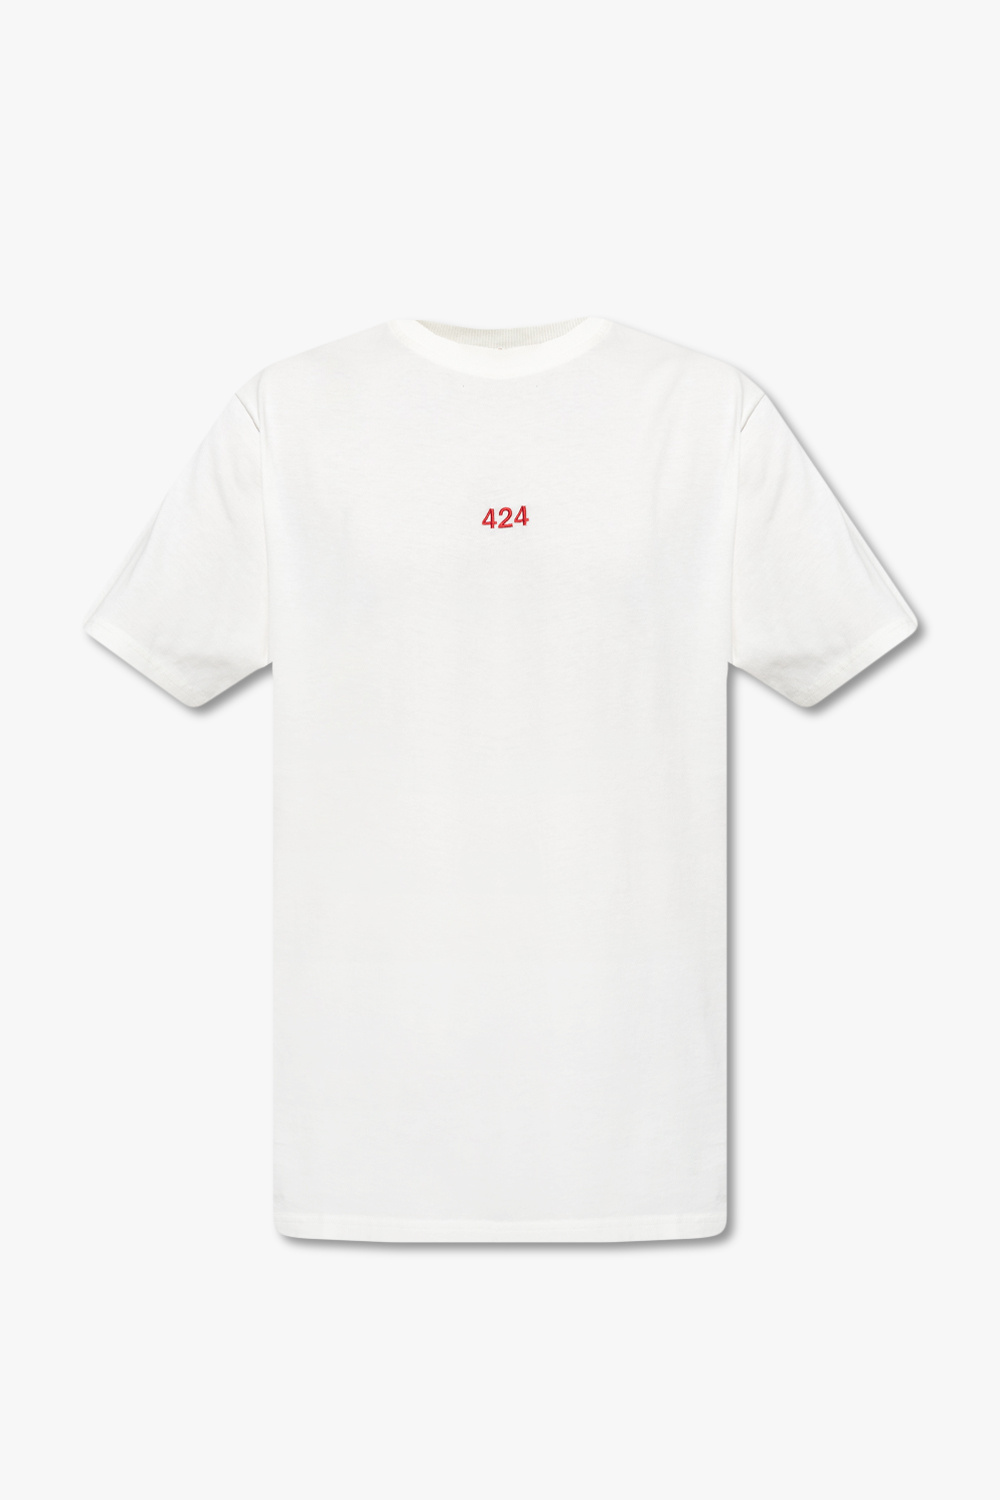 424 Logo-embroidered T-shirt